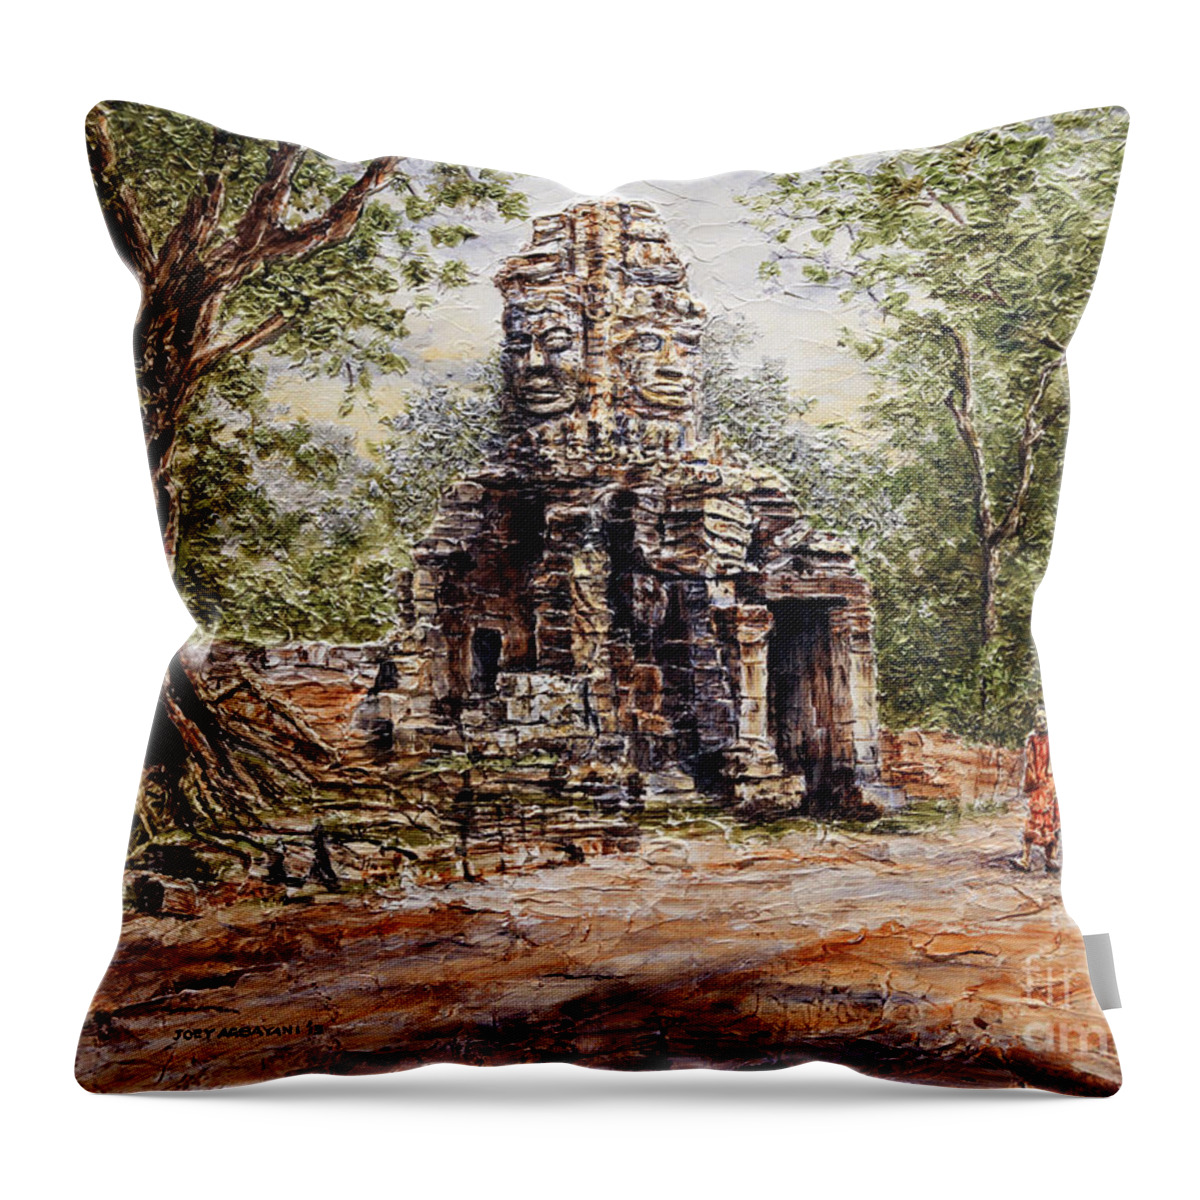 Monks Throw Pillow featuring the painting Angkor Temple Gate by Joey Agbayani